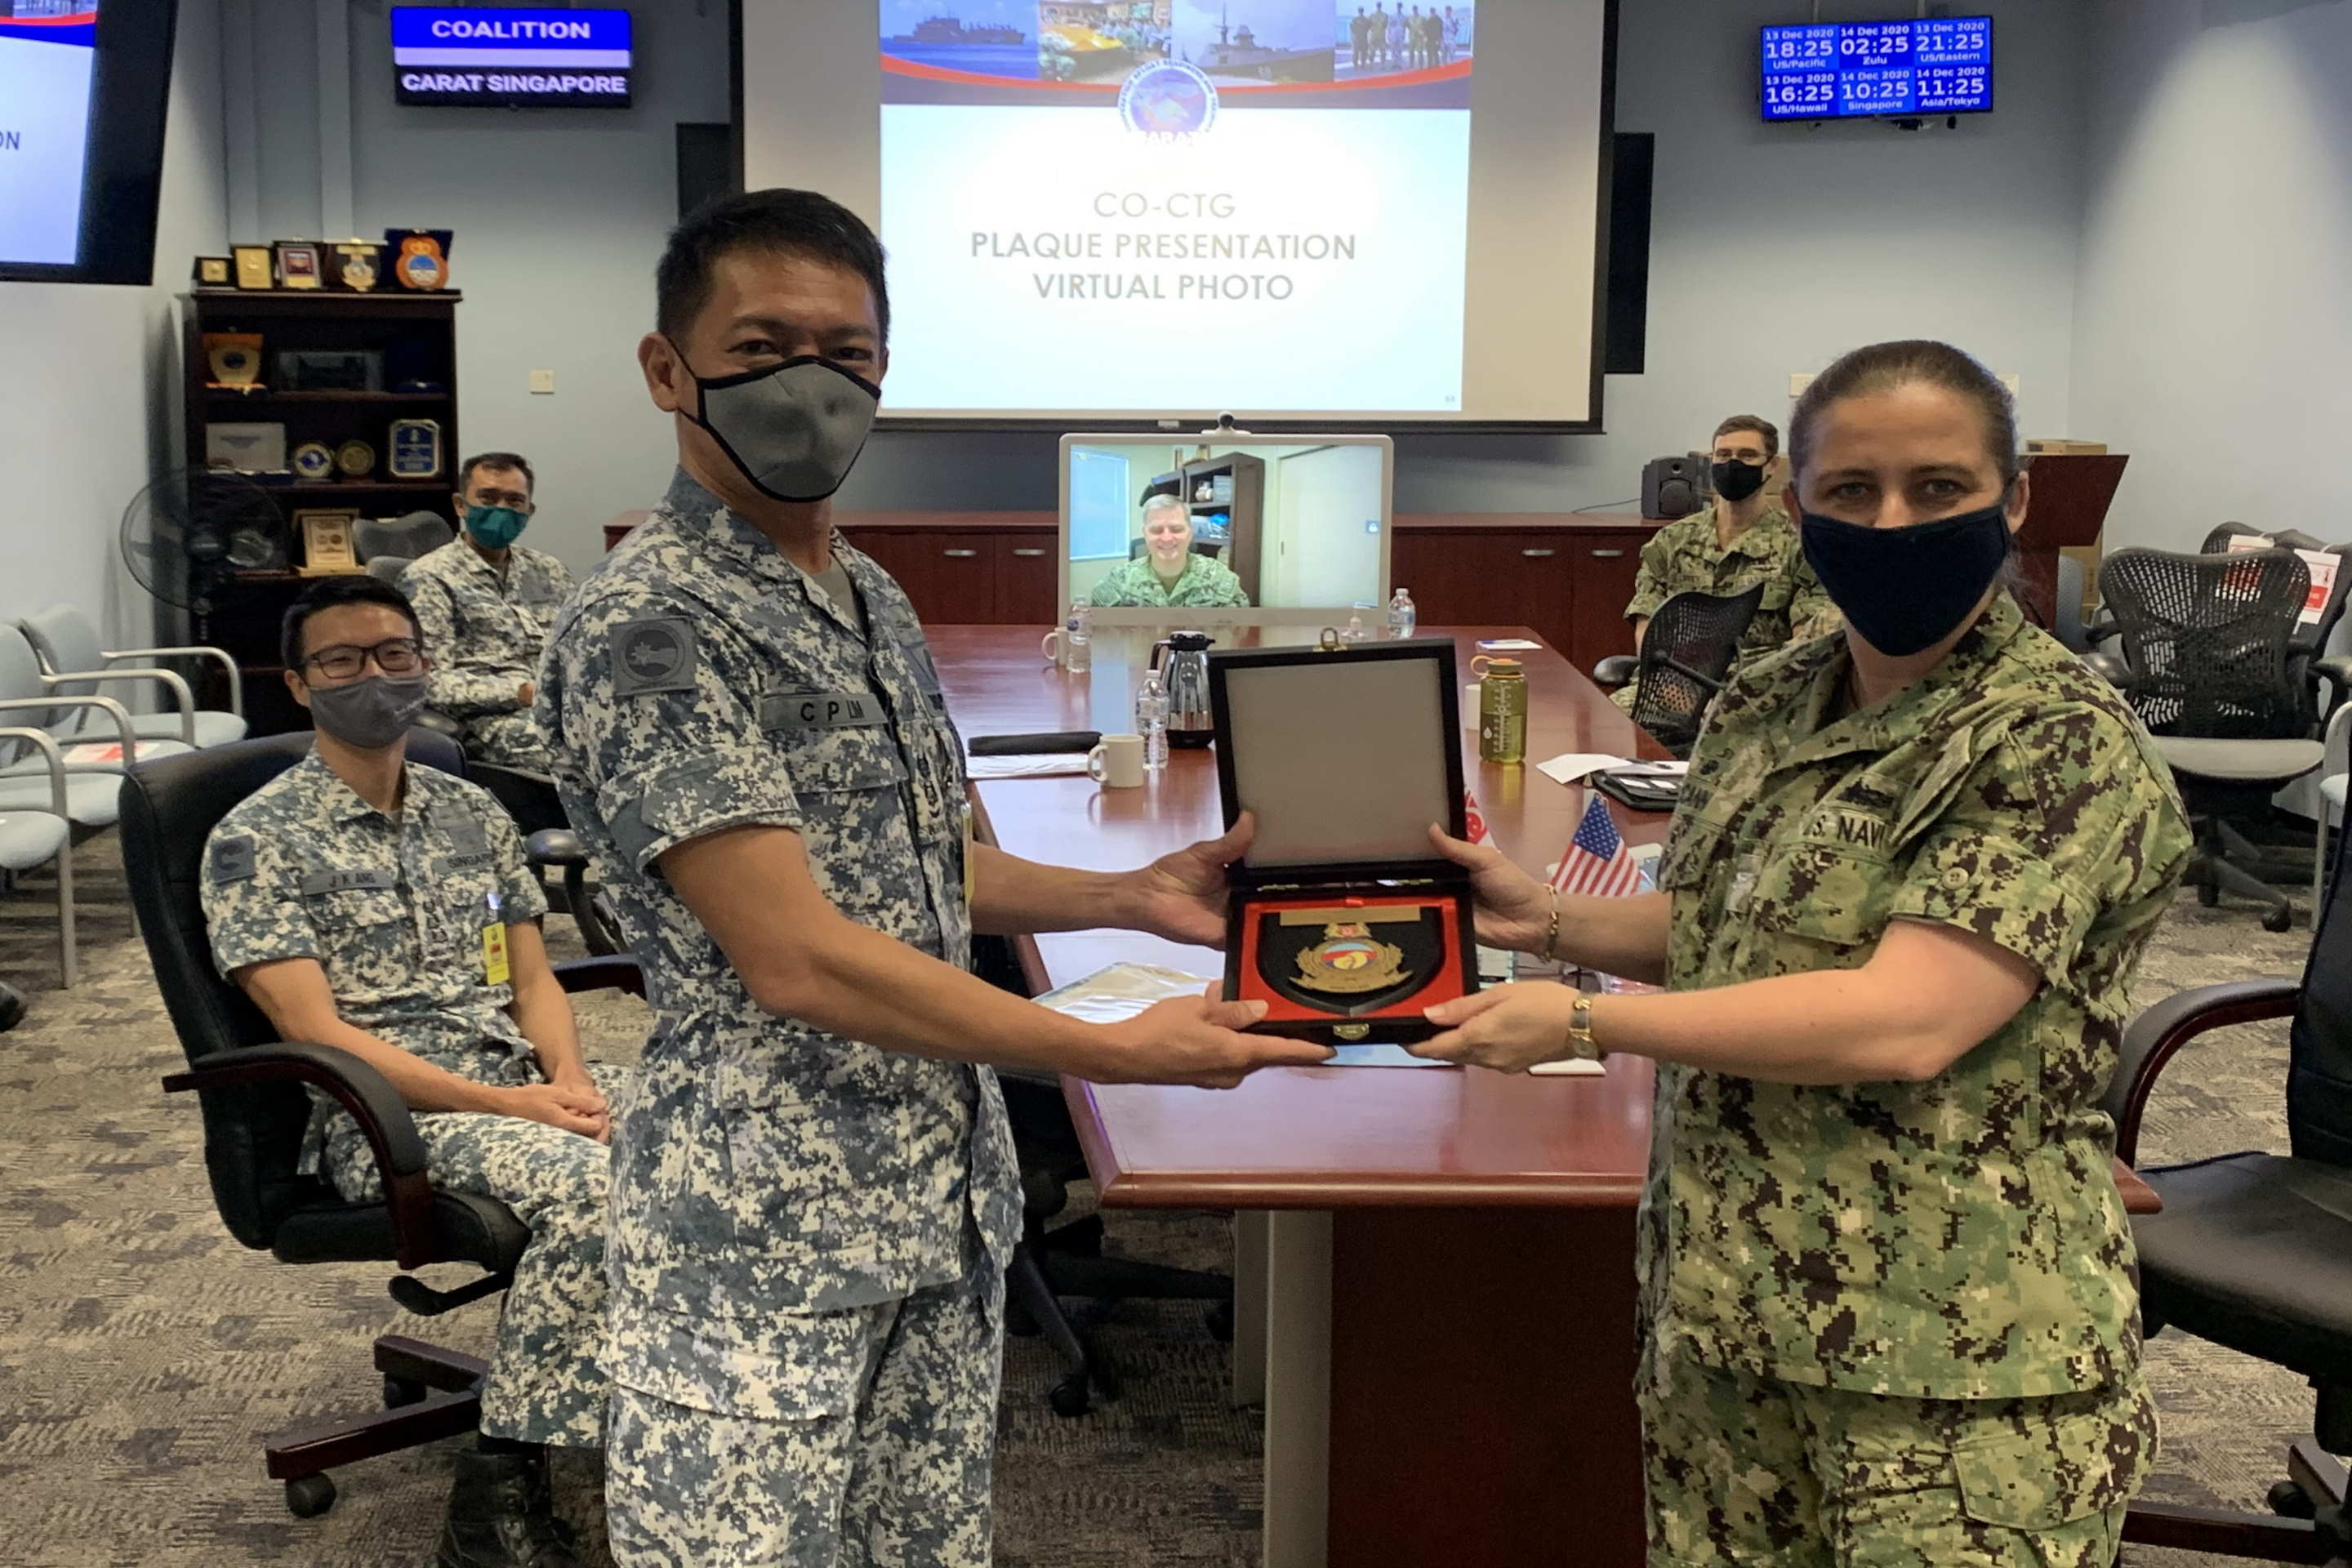 Presentation of plaque by RSN Senior Lieutenant-Colonel (SLTC) Lim CHee Peng, Deputy Commander 3rd Flotilla to USN Captain (CAPT) Ann McCann, Commodore Destroyer Squadron 7 at the closing ceremony of Exercise CARAT 2020 earlier today.